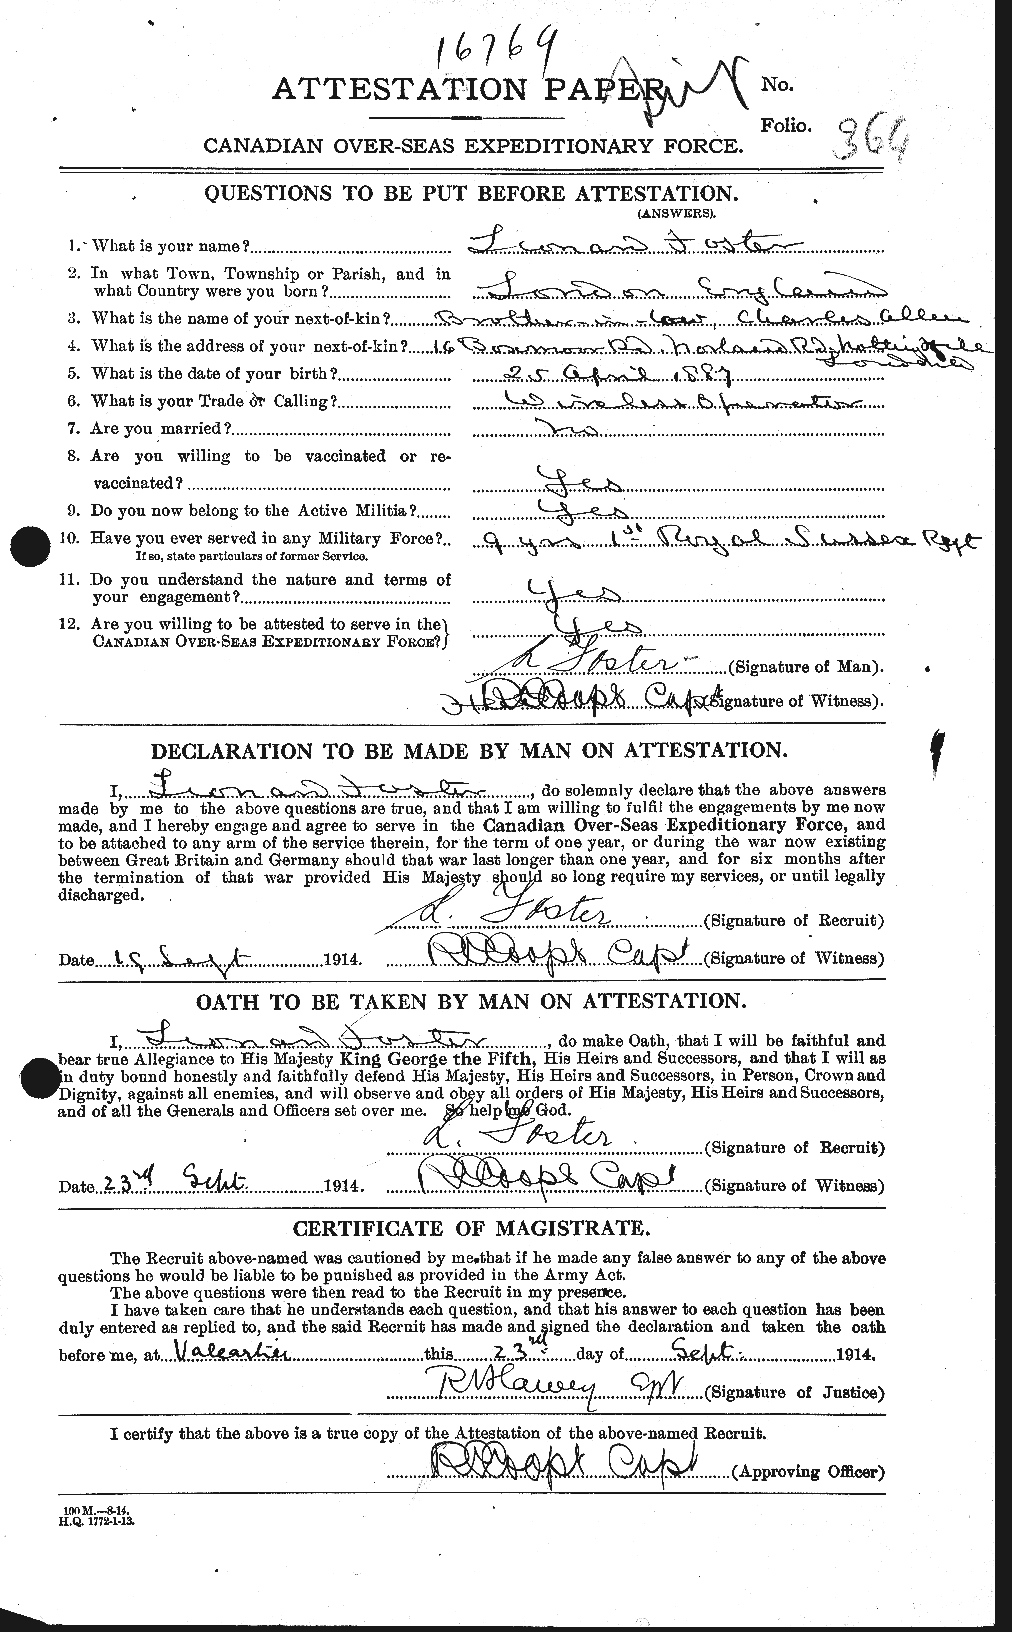 Personnel Records of the First World War - CEF 333403a